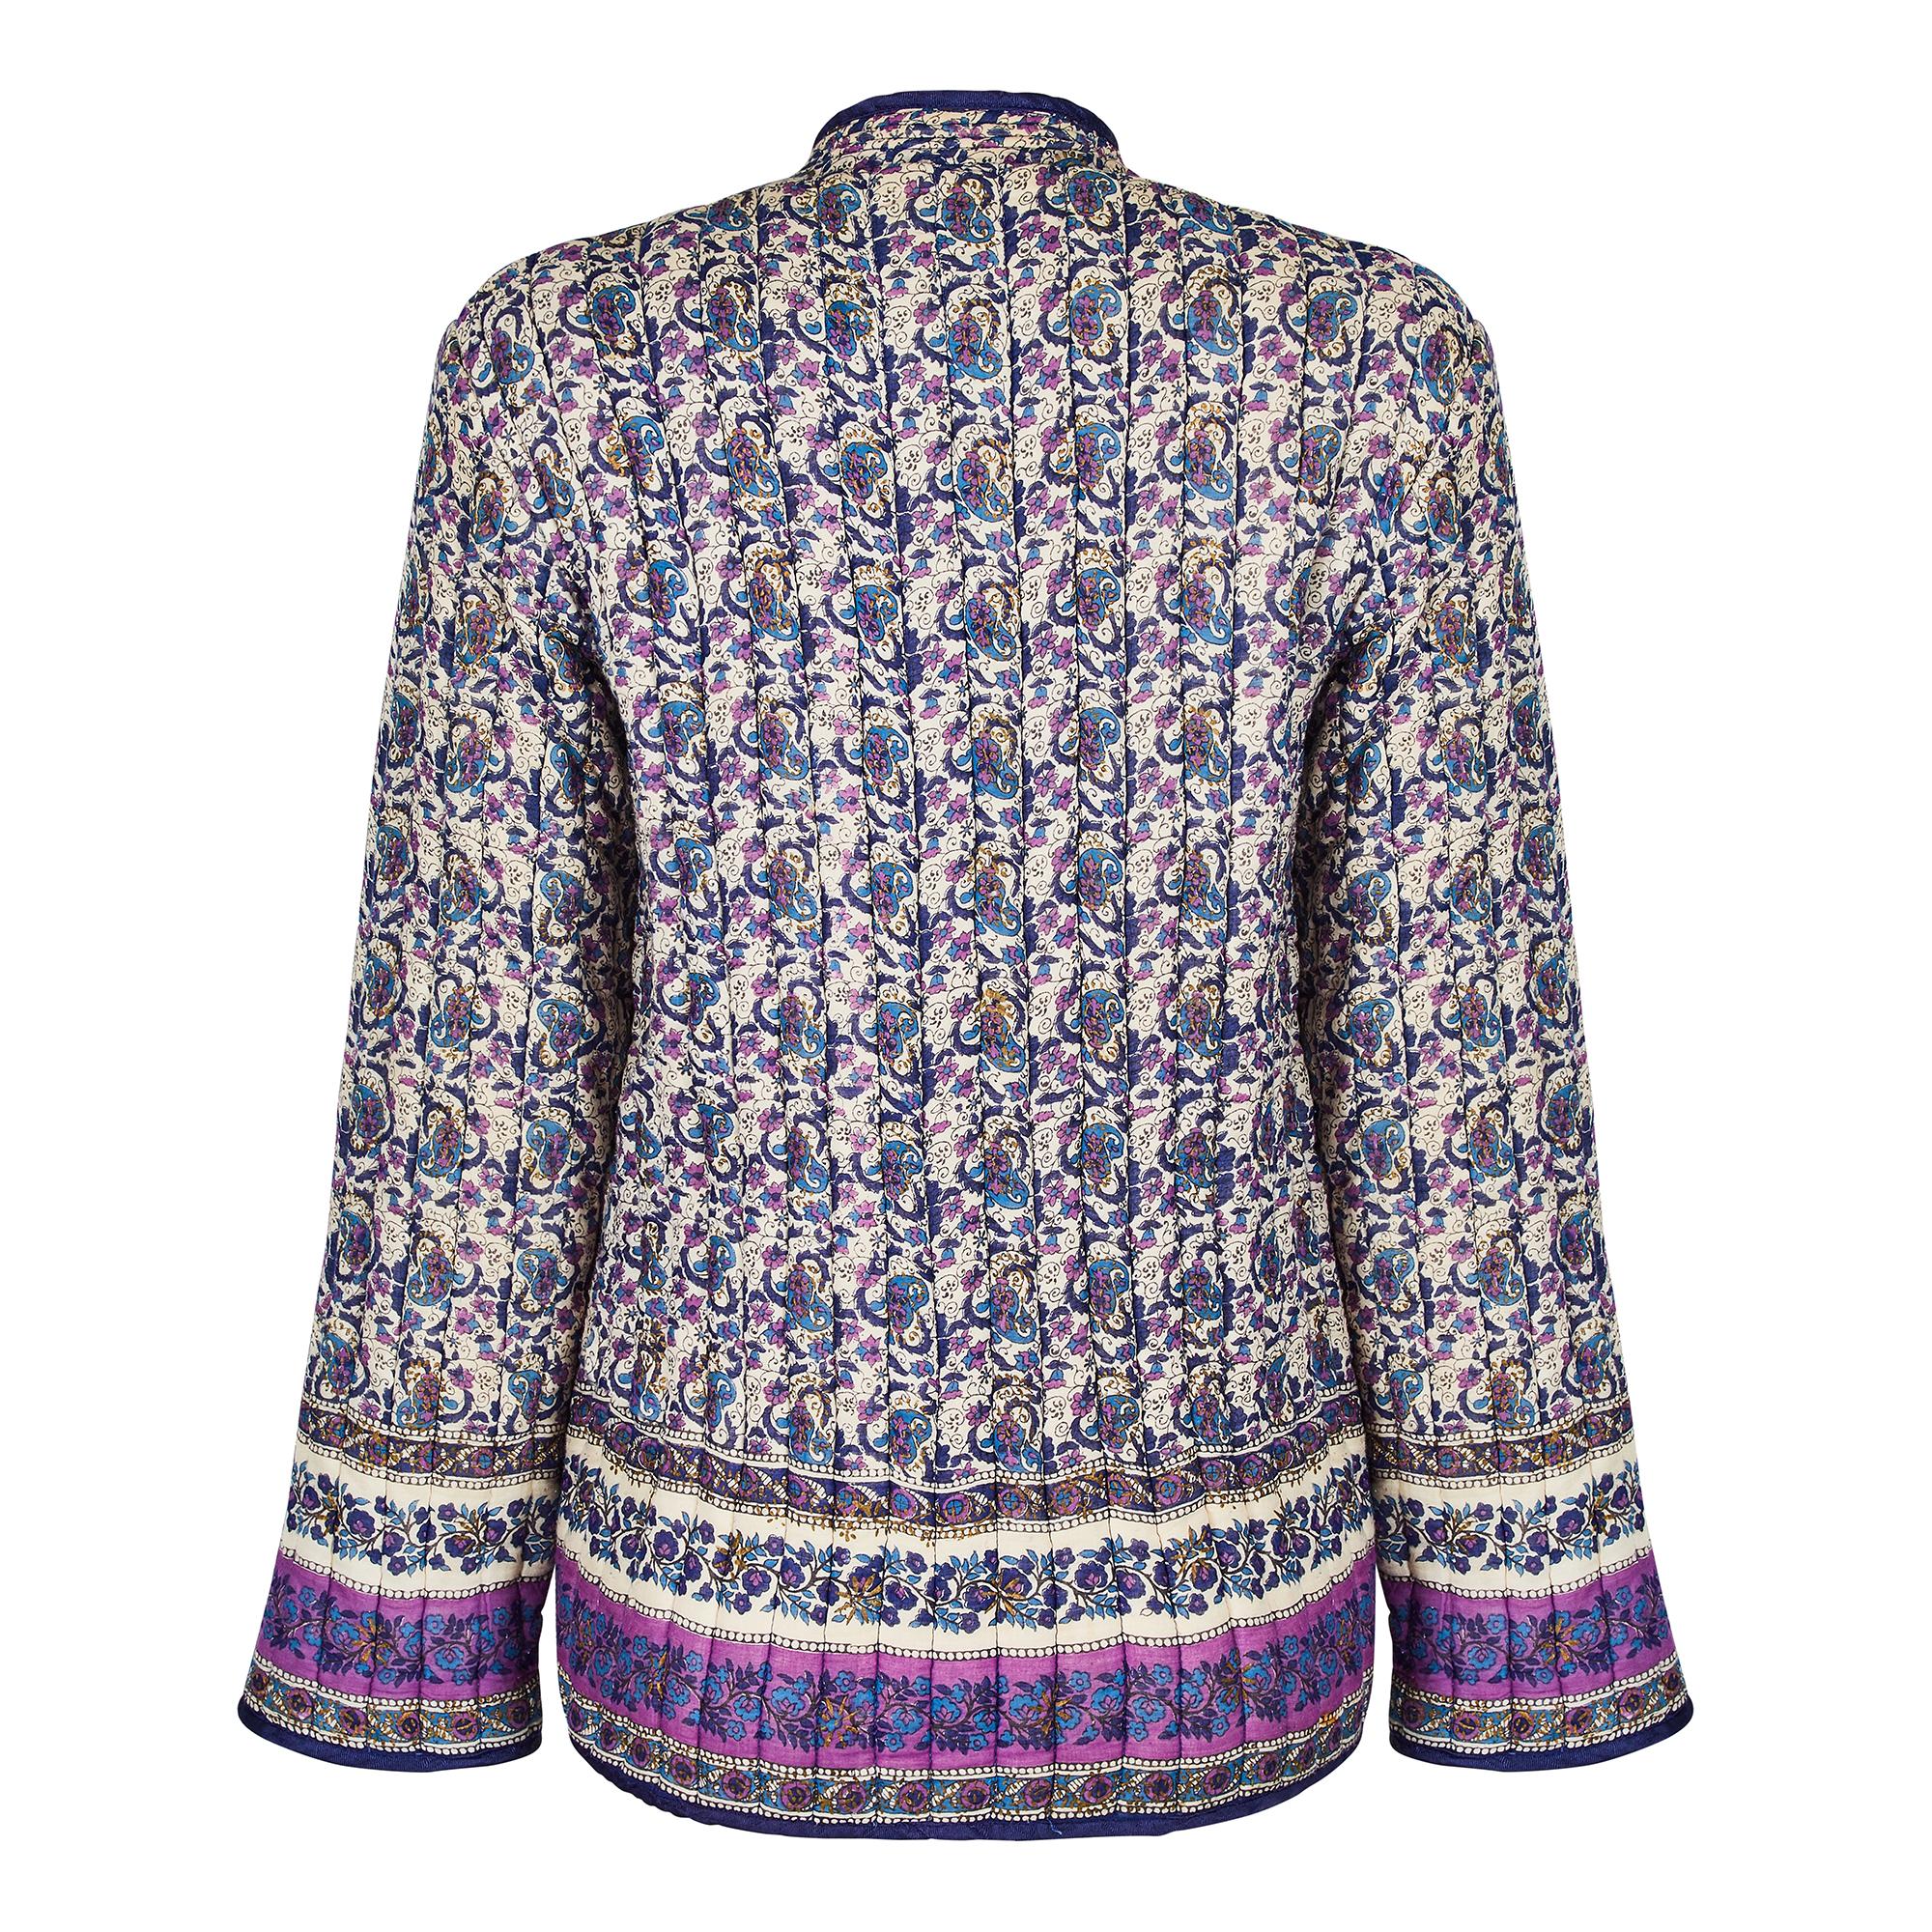 A very desirable and original 1960s Indian handprinted and painted, padded jacket. We love everything about these Indian print paisley jackets which epitomised the boho hippy chic vibe of the era. It is made from an extremely soft and tactile fine